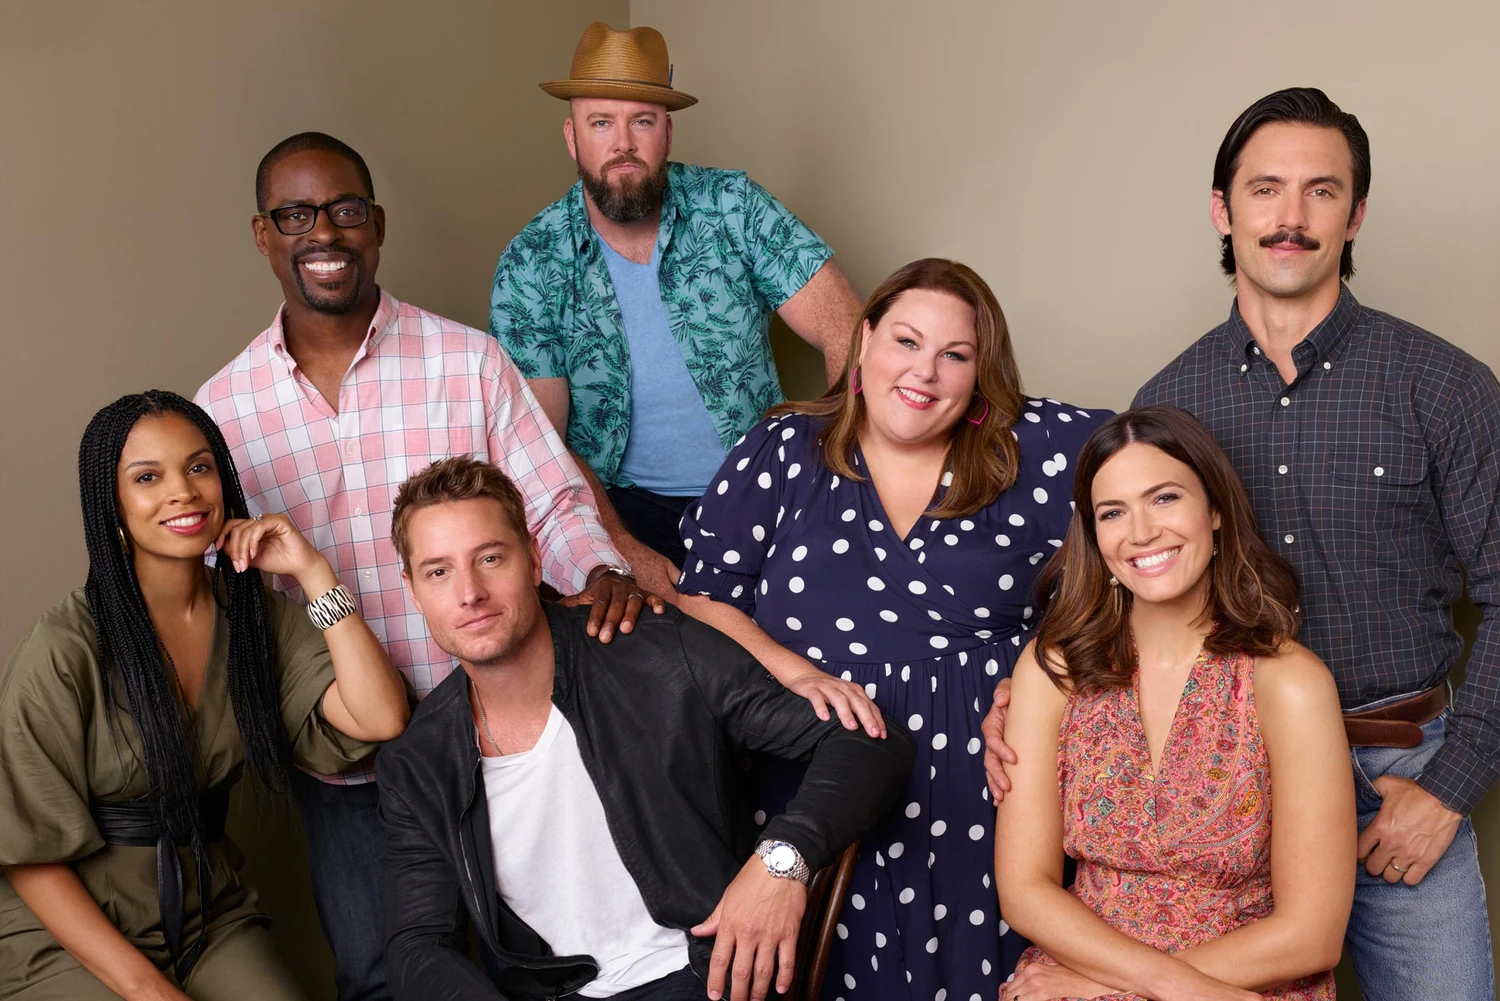 This Is Us cast photo